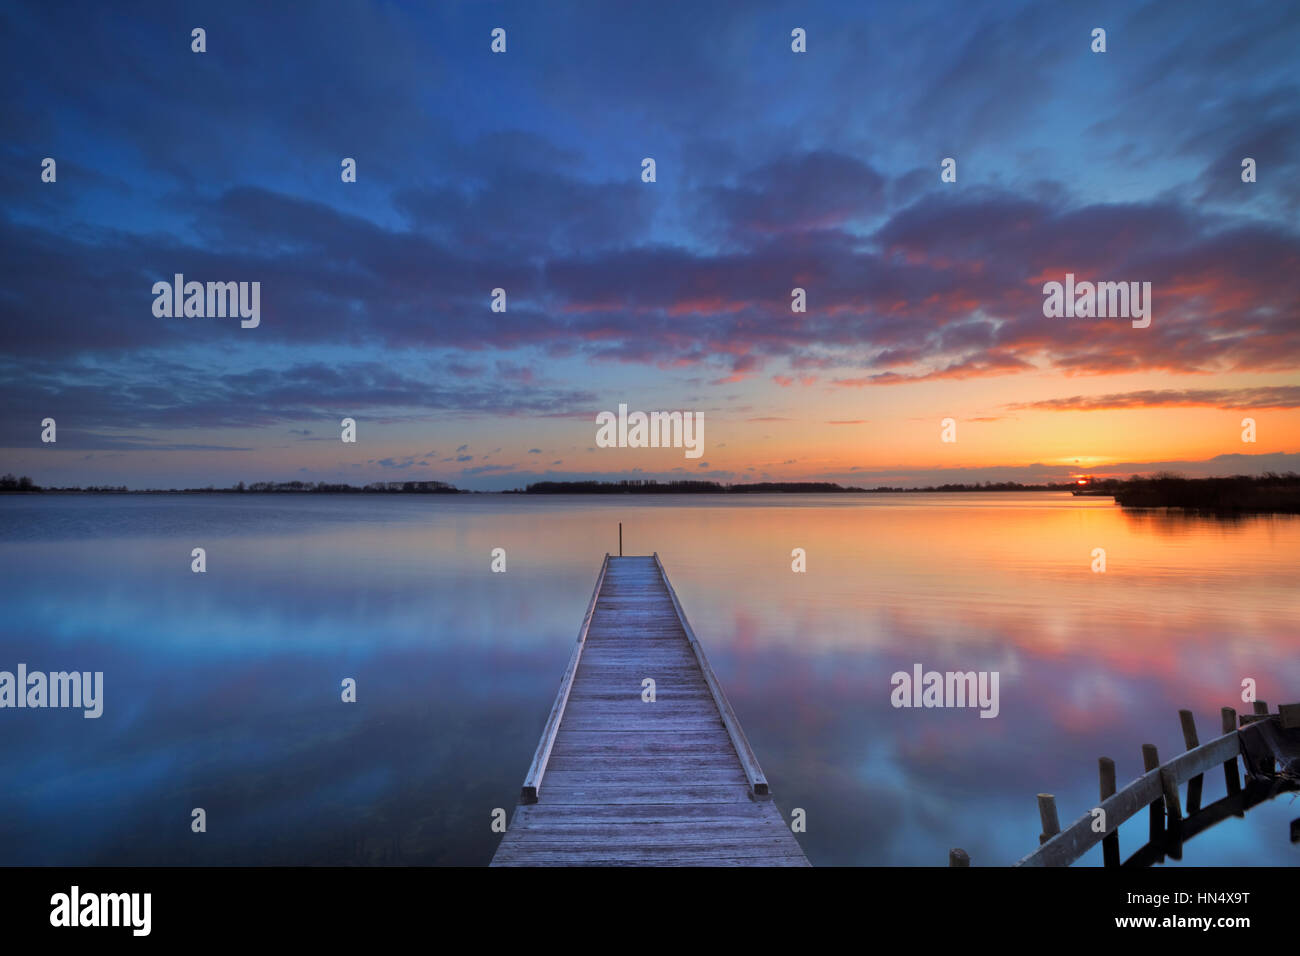 A small jetty on a lake at sunrise. Photographed near Amsterdam in The Netherlands. Stock Photo